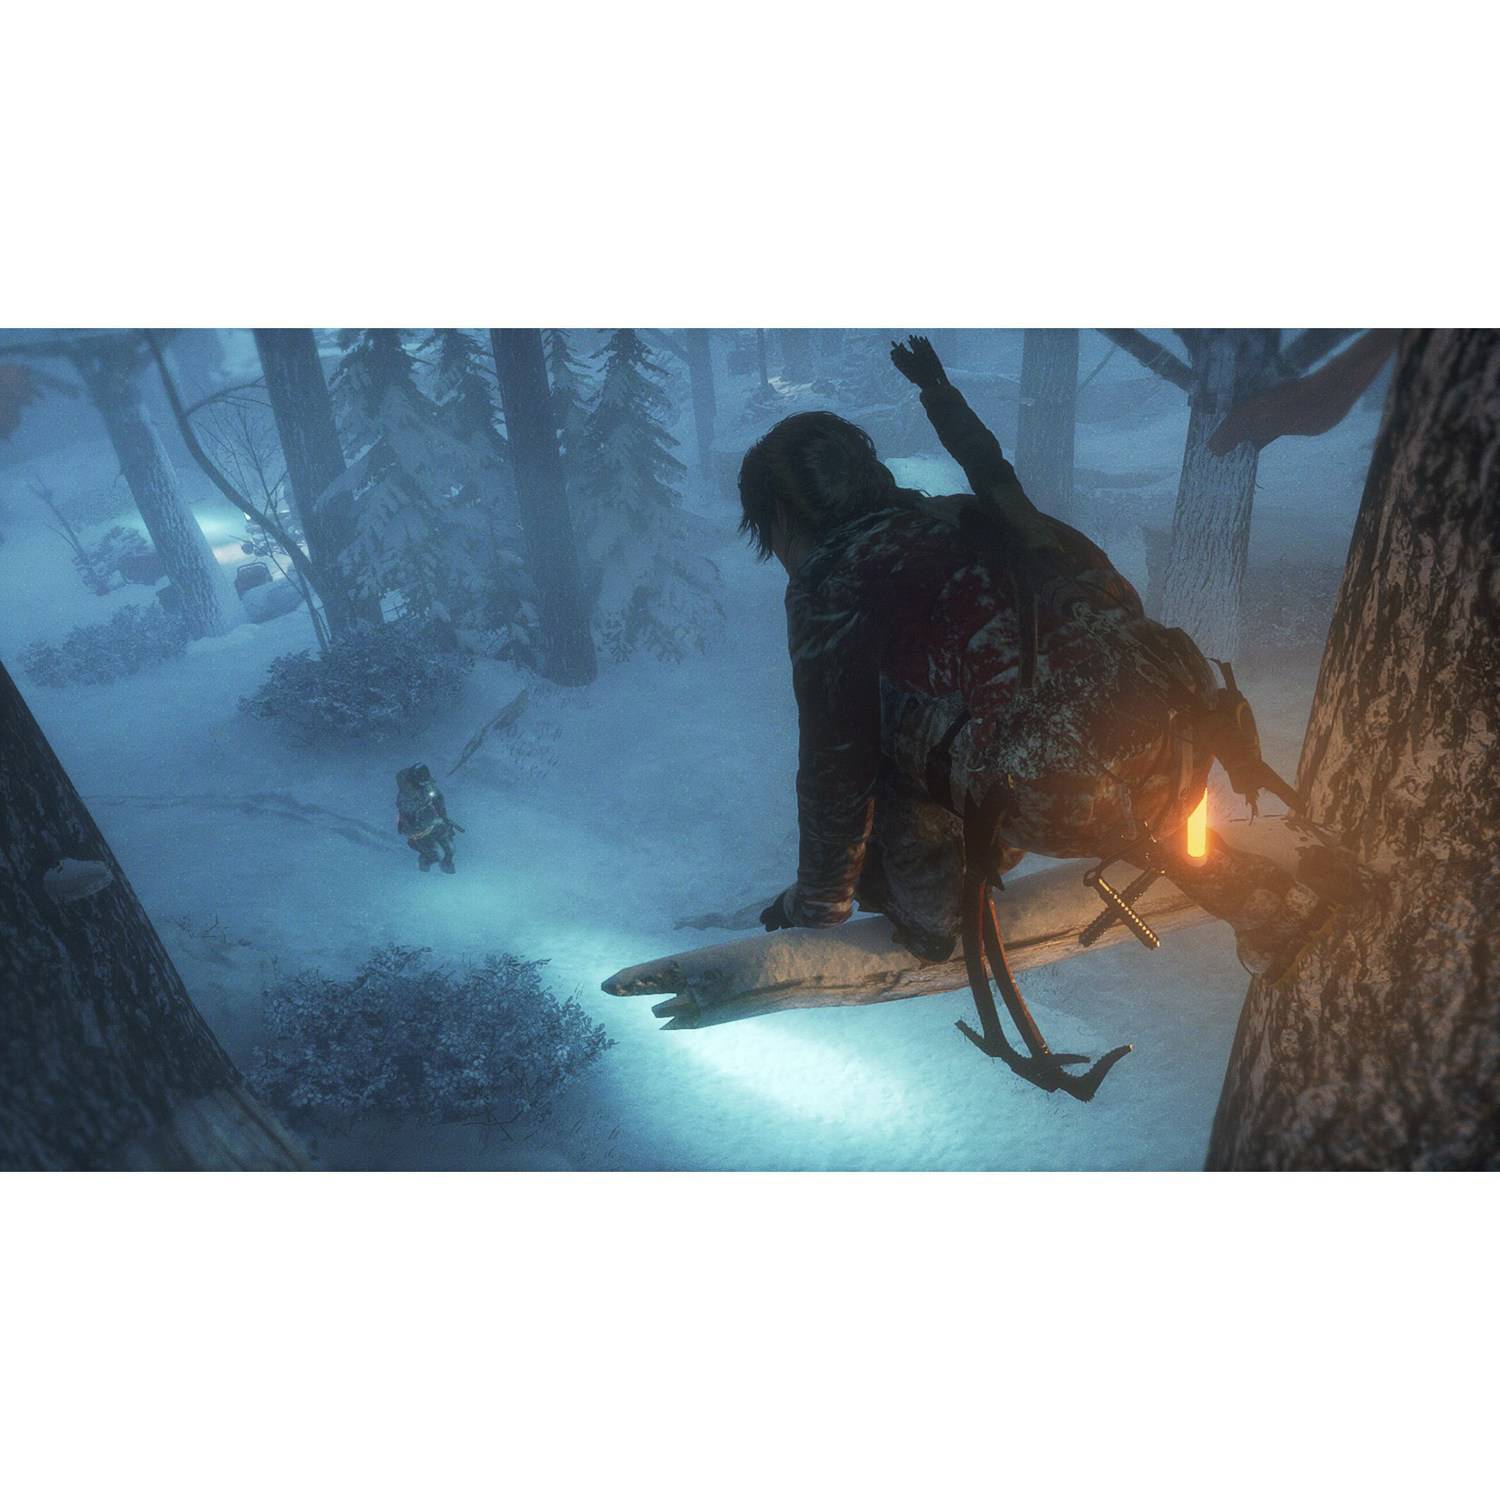 Rise of the Tomb Raider, Microsoft, Xbox 360, 885370982251 - image 4 of 11